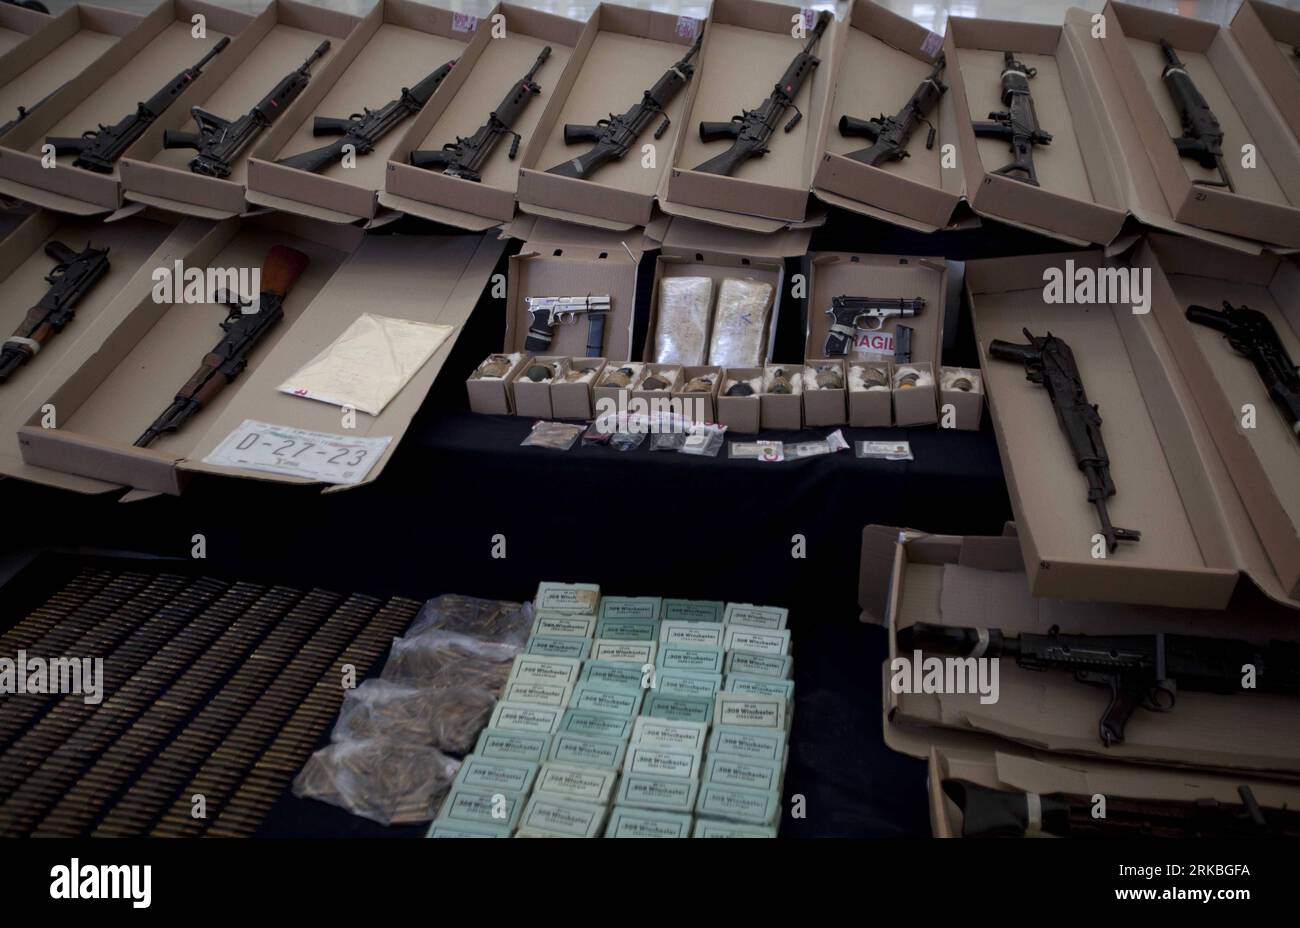 Bildnummer: 54558215  Datum: 22.10.2010  Copyright: imago/Xinhua (101022) -- MEXICO CITY, Oct. 22, 2010 (Xinhua) -- Weapons and drugs seized from two members of the drug cartel Los Zetas are shown to the press in Mexico City, on Oct. 22, 2010. Mexican police arrested Margarito Mendoza Lopez and Carmen Zuniga Arcia, members of the drug cartel the Los Zetas in Tabasco, south of Mexico, and seized 73 weapons, 2275 bullet cartridges and 2 kilograms of cocaine. (Xinhua/Jorge Dan Lopez) (zw) MEXICO-DRUG-CRIME-ARREST PUBLICATIONxNOTxINxCHN Gesellschaft Polizei Waffen Präsentation Mexiko kbdig xsp 201 Stock Photo